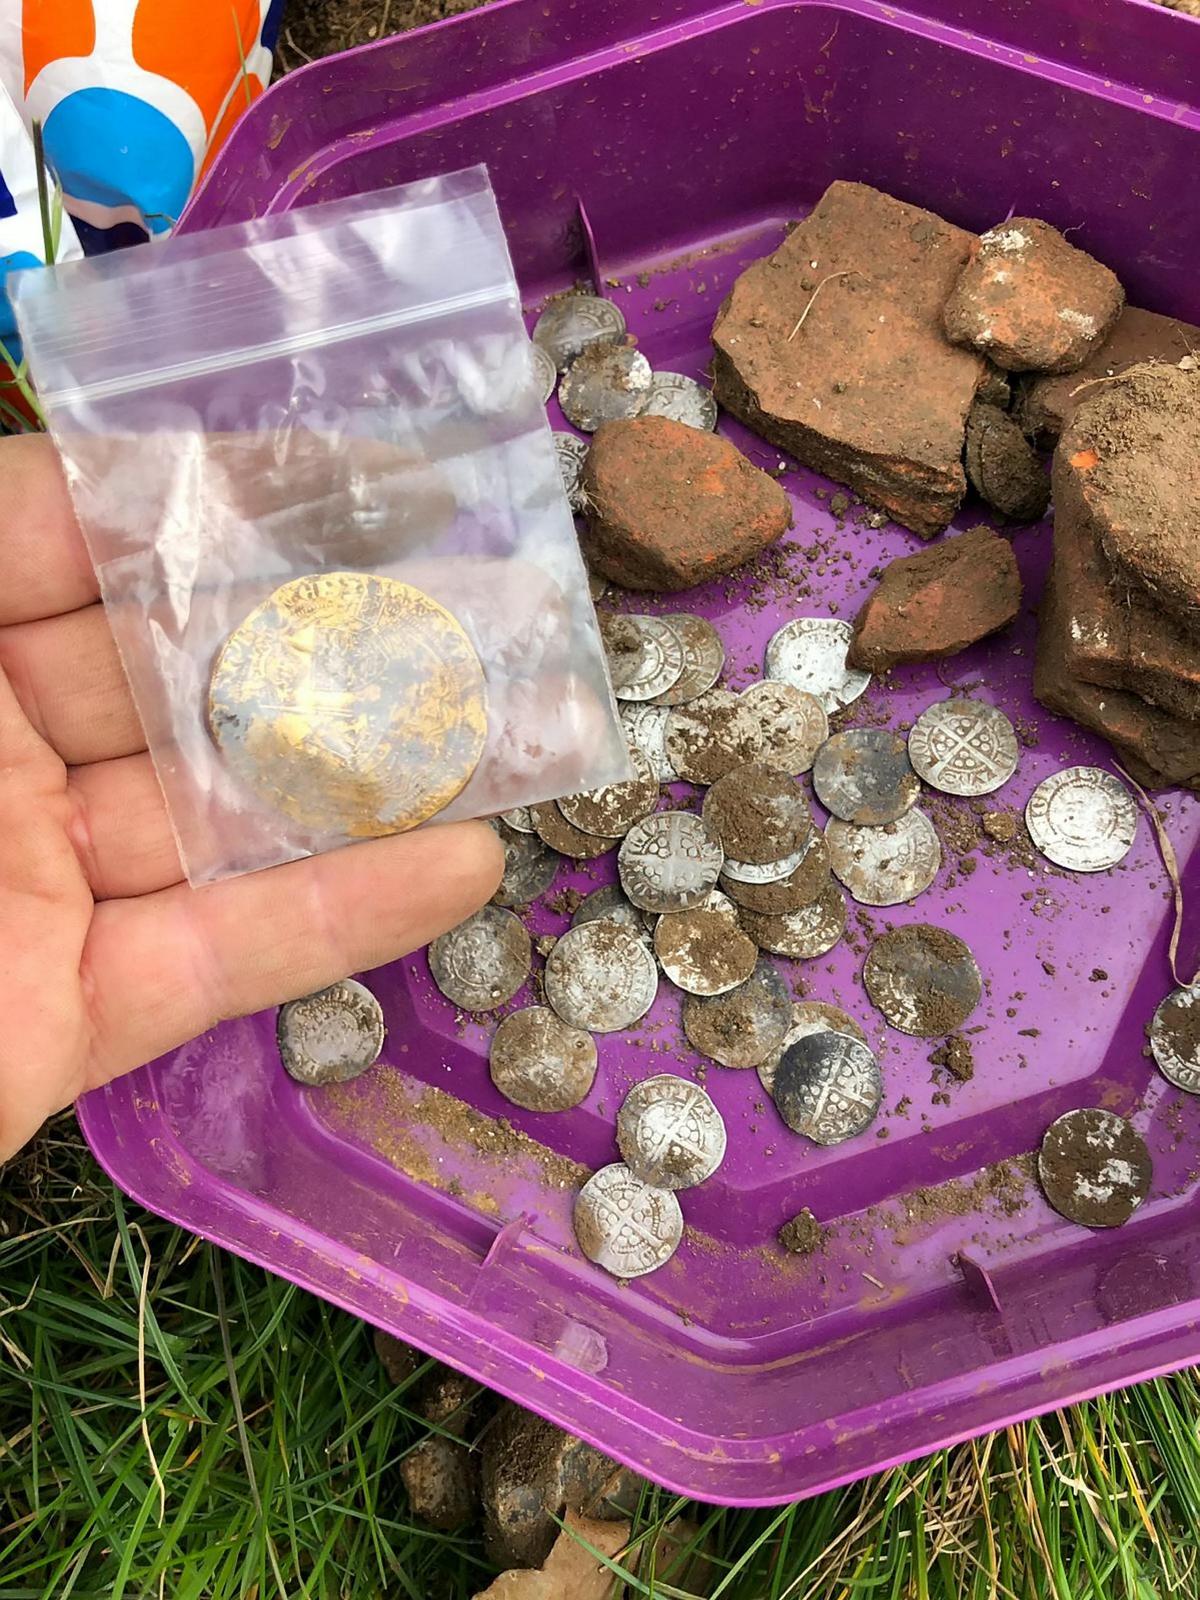 Gold and silver coins being packaged at the dig site near Hambleden, Buckinghamshire. (SWNS)